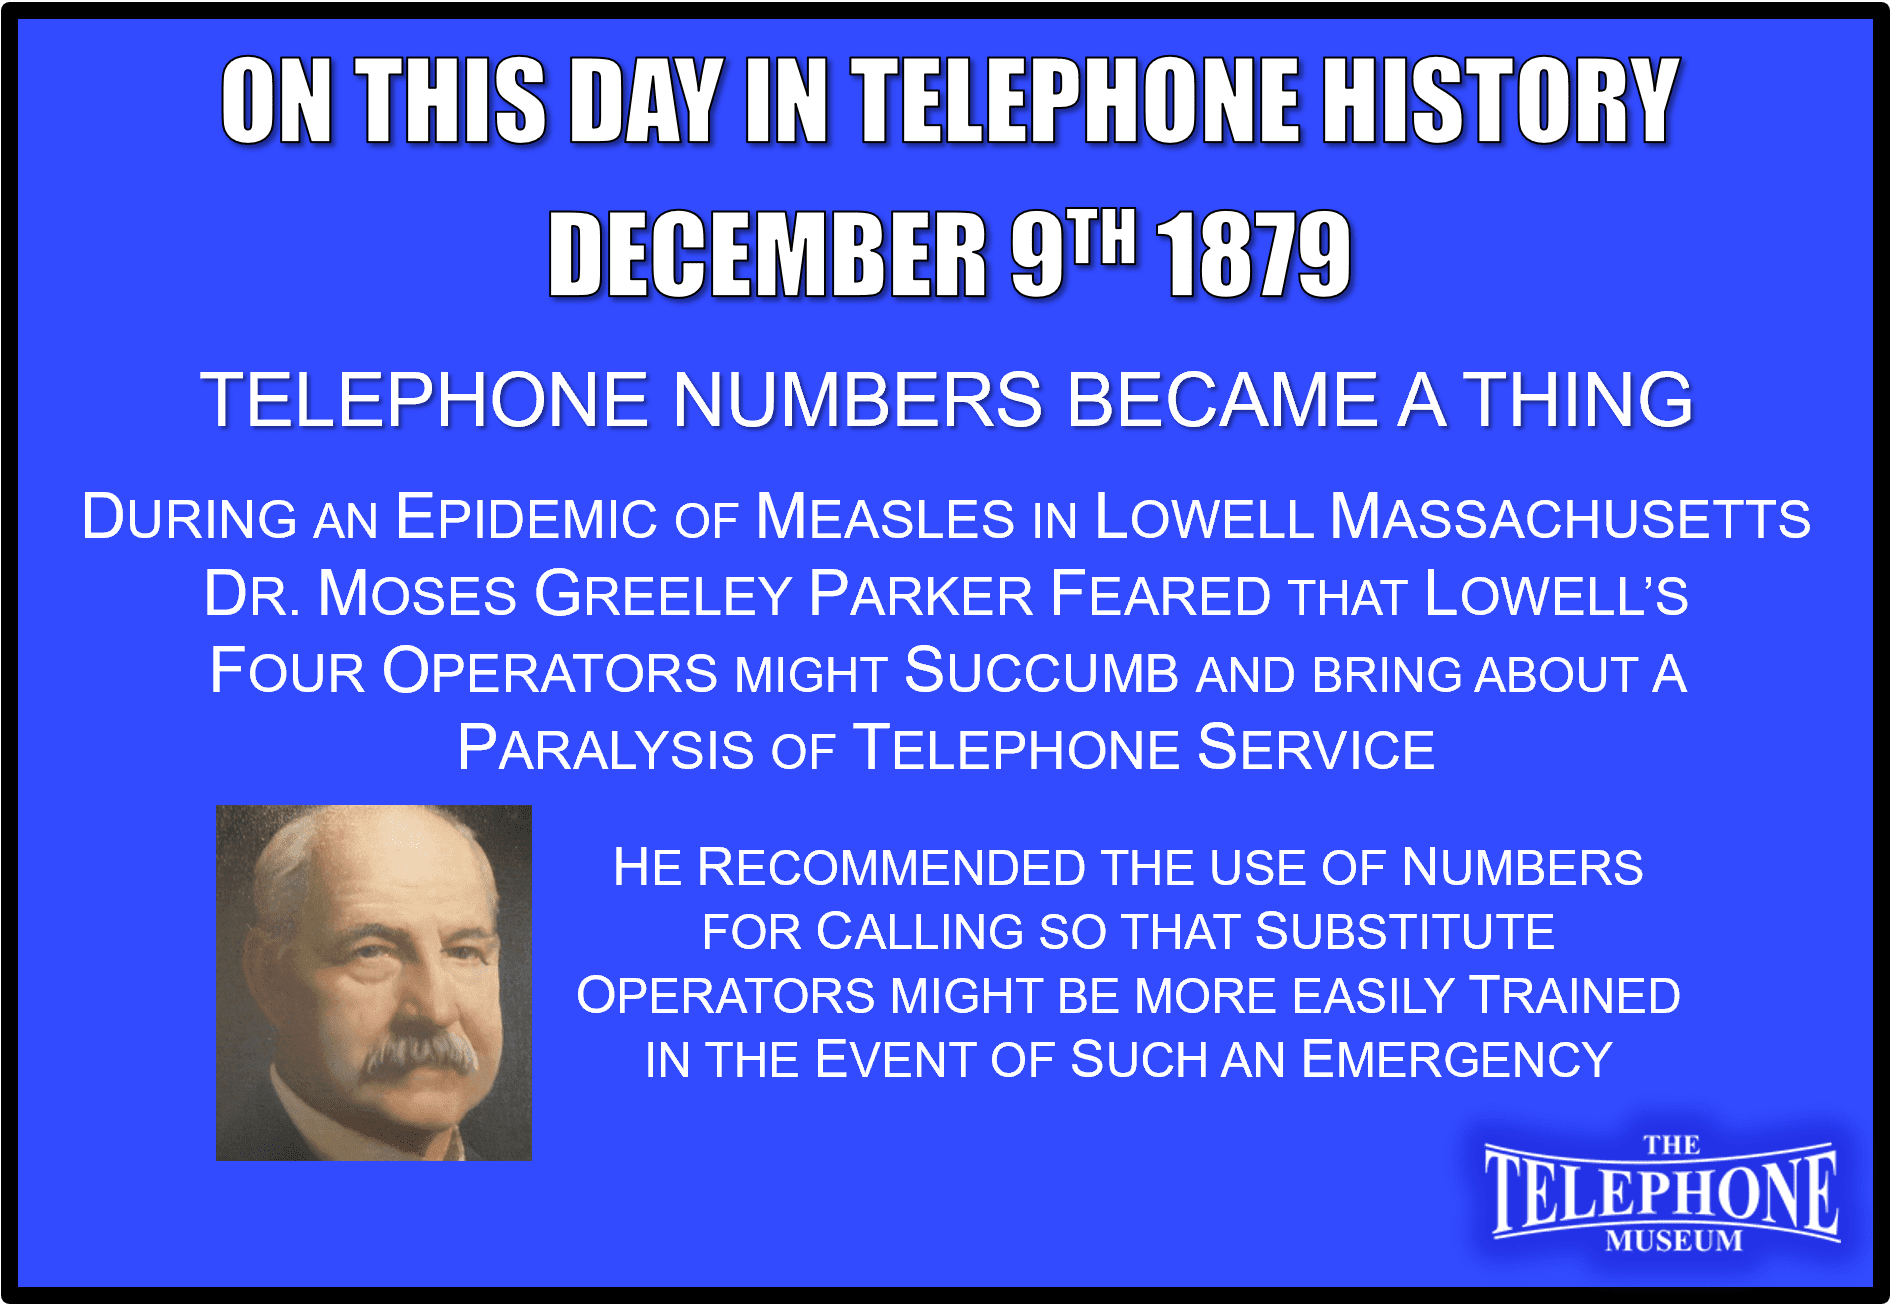 On This Day in Telephone History December 9TH 1879 Telephone Numbers Became A Thing. Telephone Numbers - The latter part of 1879 and the early part of 1880 saw the first use of telephone numbers at Lowell, Mass. The story is well substantiated that during an epidemic of measles, Dr. Moses Greeley Parker feared that Lowell's four operators might succumb and bring about a paralysis of telephone service. He recommended the use of numbers for calling Lowell's more than 200 subscribers, so that substitute operators might be more easily trained in the event of such an emergency. The telephone management at Lowell feared that the public would take the assignment of numbers as an indignity, but the telephone users saw the practical value of the change immediately and it went into effect with no stir whatsoever.